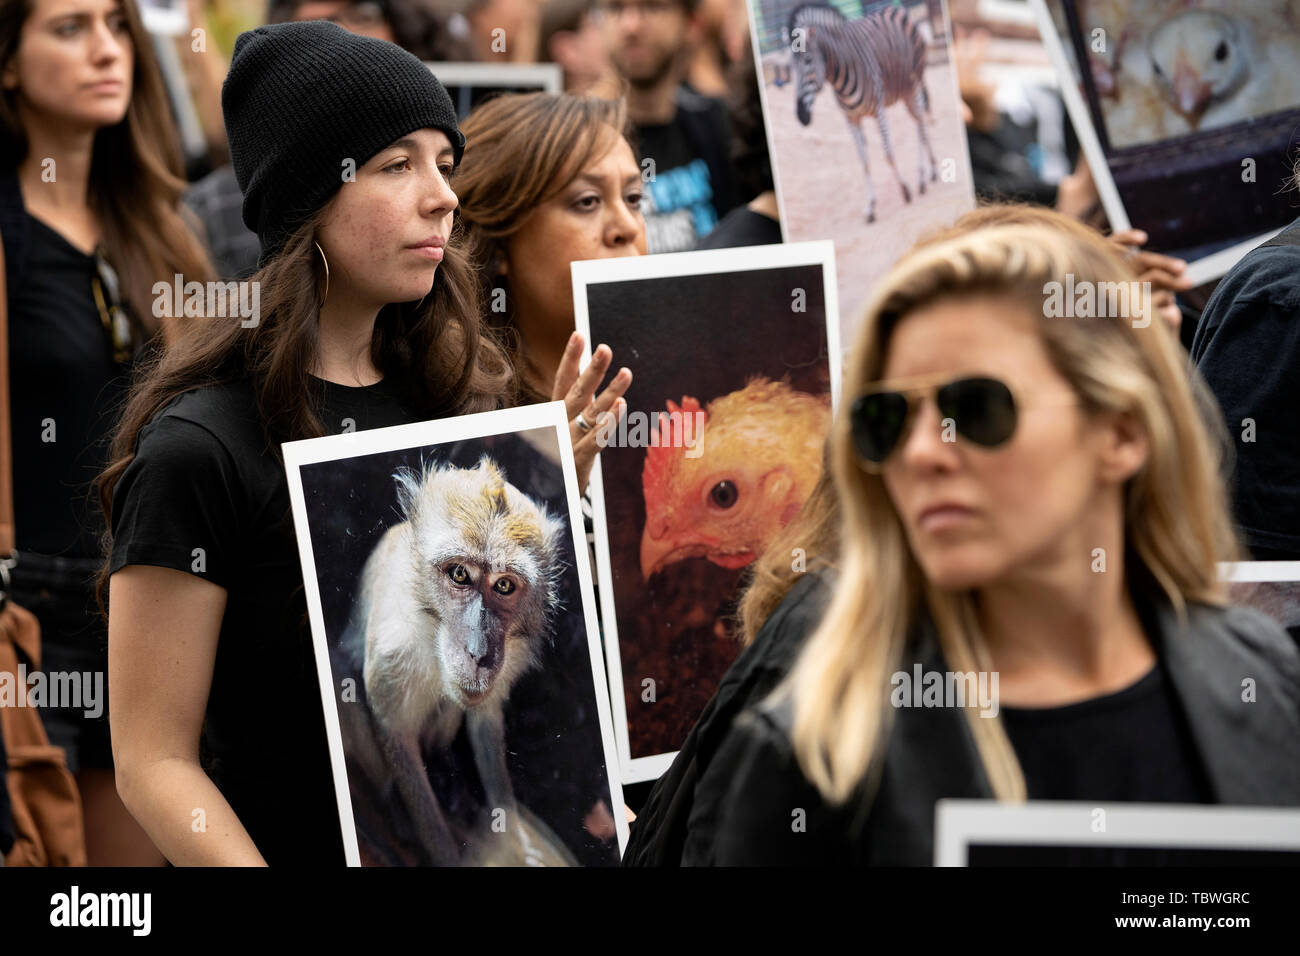 Animal rights activist holds a picture of a monkey during the 9th Annual National Animal Rights Day in Los Angeles, California.  The event included a memorial ceremony and a funeral march for animals that are slaughtered for meat consumption, die in research laboratories and the cosmetics industry. Organizers called to end animal cruelty and suffering. Stock Photo